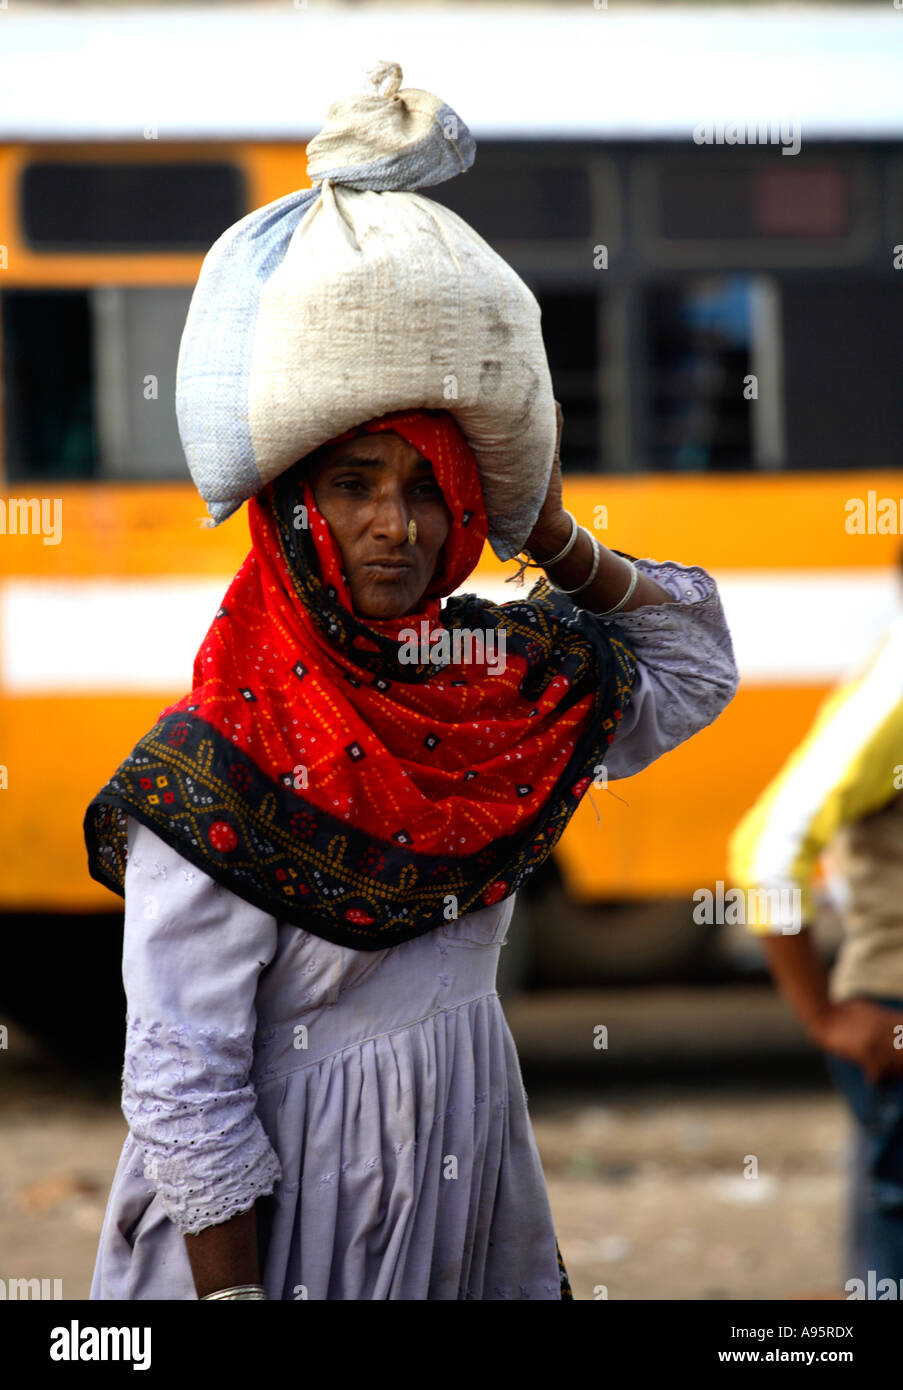 Tribal Indian woman from Kutch district carrying sack on head at bus-stand, Bhuj, Gujarat, India Stock Photo